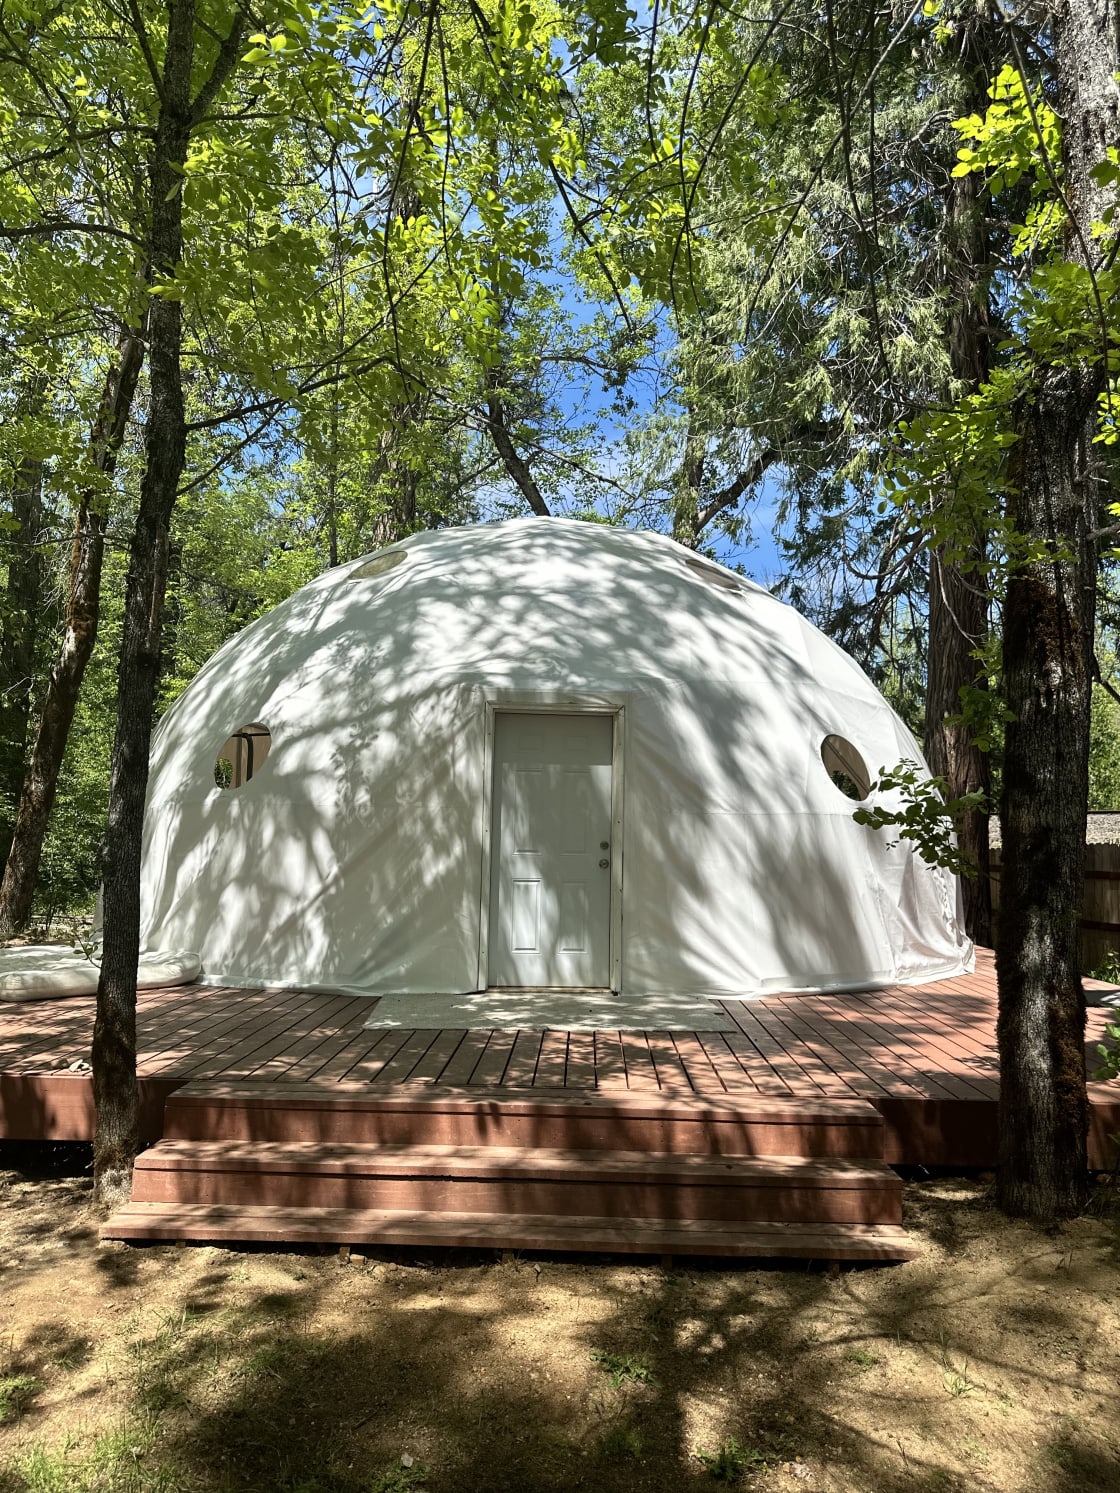 Our brand new 30’ Pacific Dome!  A lovely lodge-type space for your group’s activities and needs while enjoying your stay with us!  